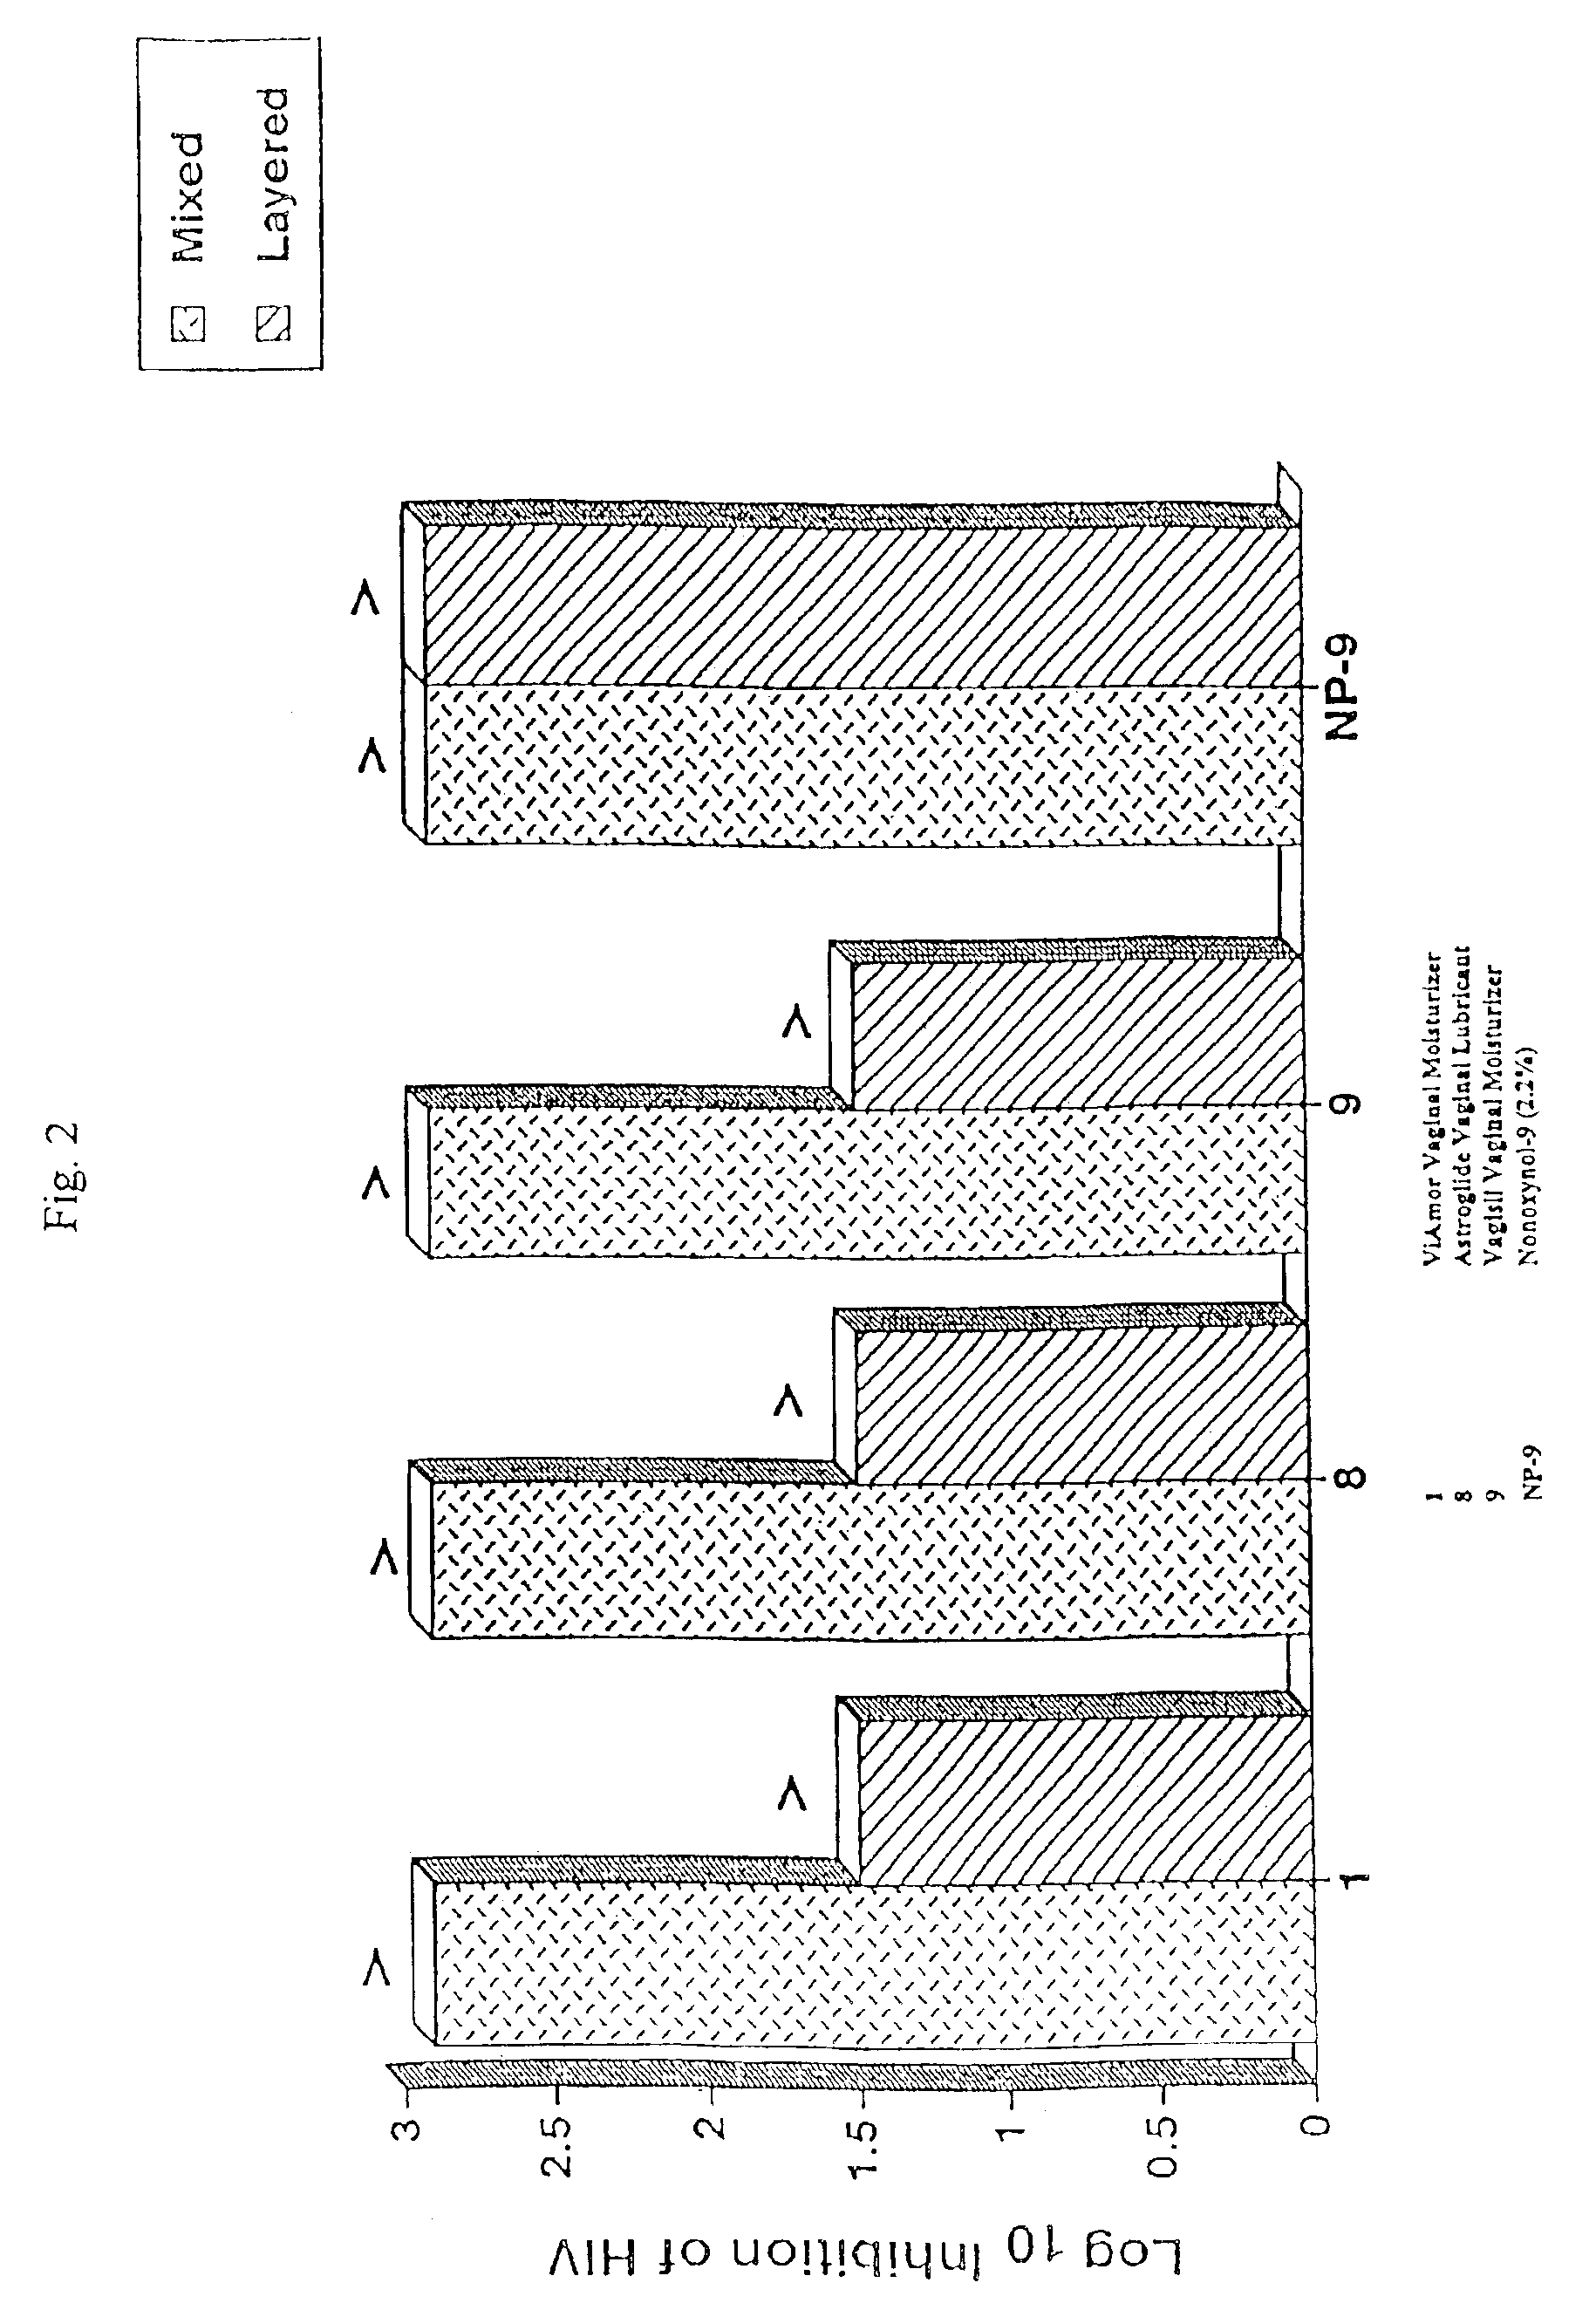 Inhibitory chemical formulation with preservative system